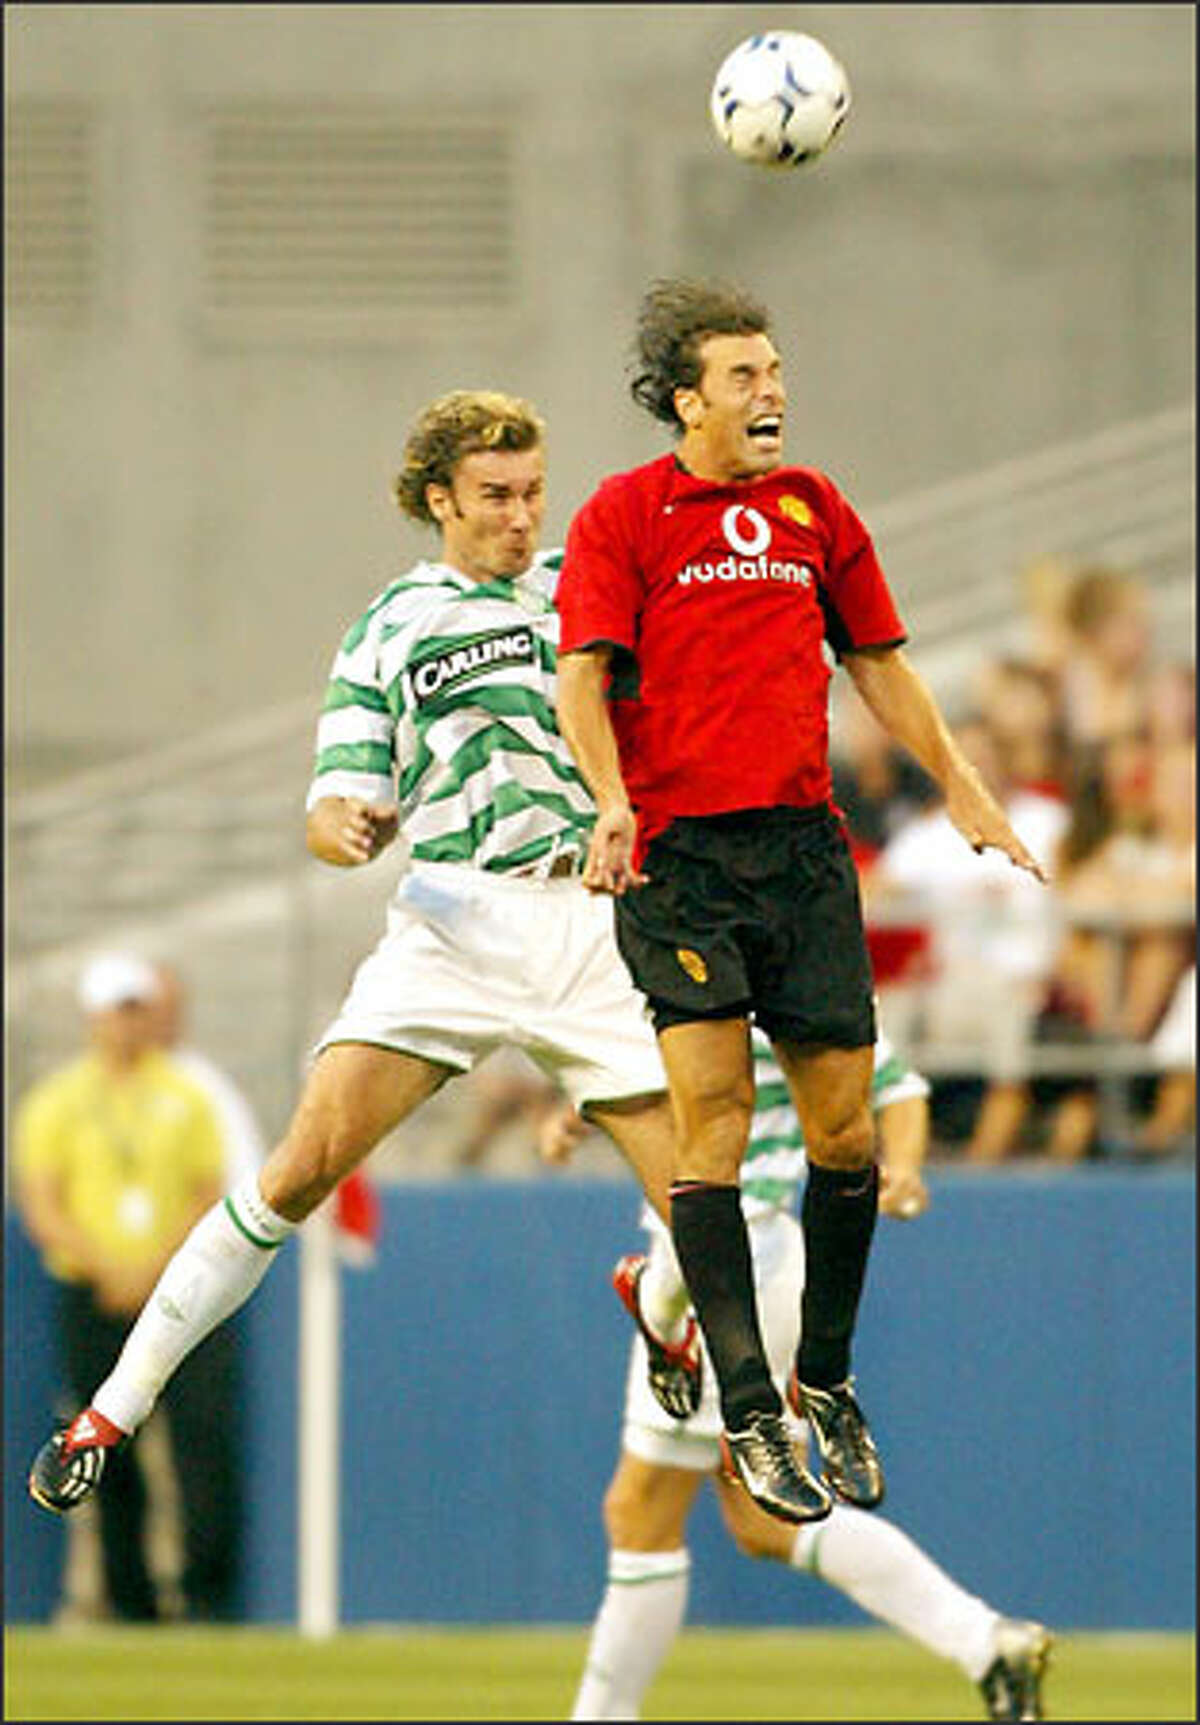 Celtic's Craig Beattie, left, and Manchester United's Ruud van Nistelrooy do their thing during first-half action at Seahawks Stadium. Nistelrooy scored Man U's first goal and set up the second.